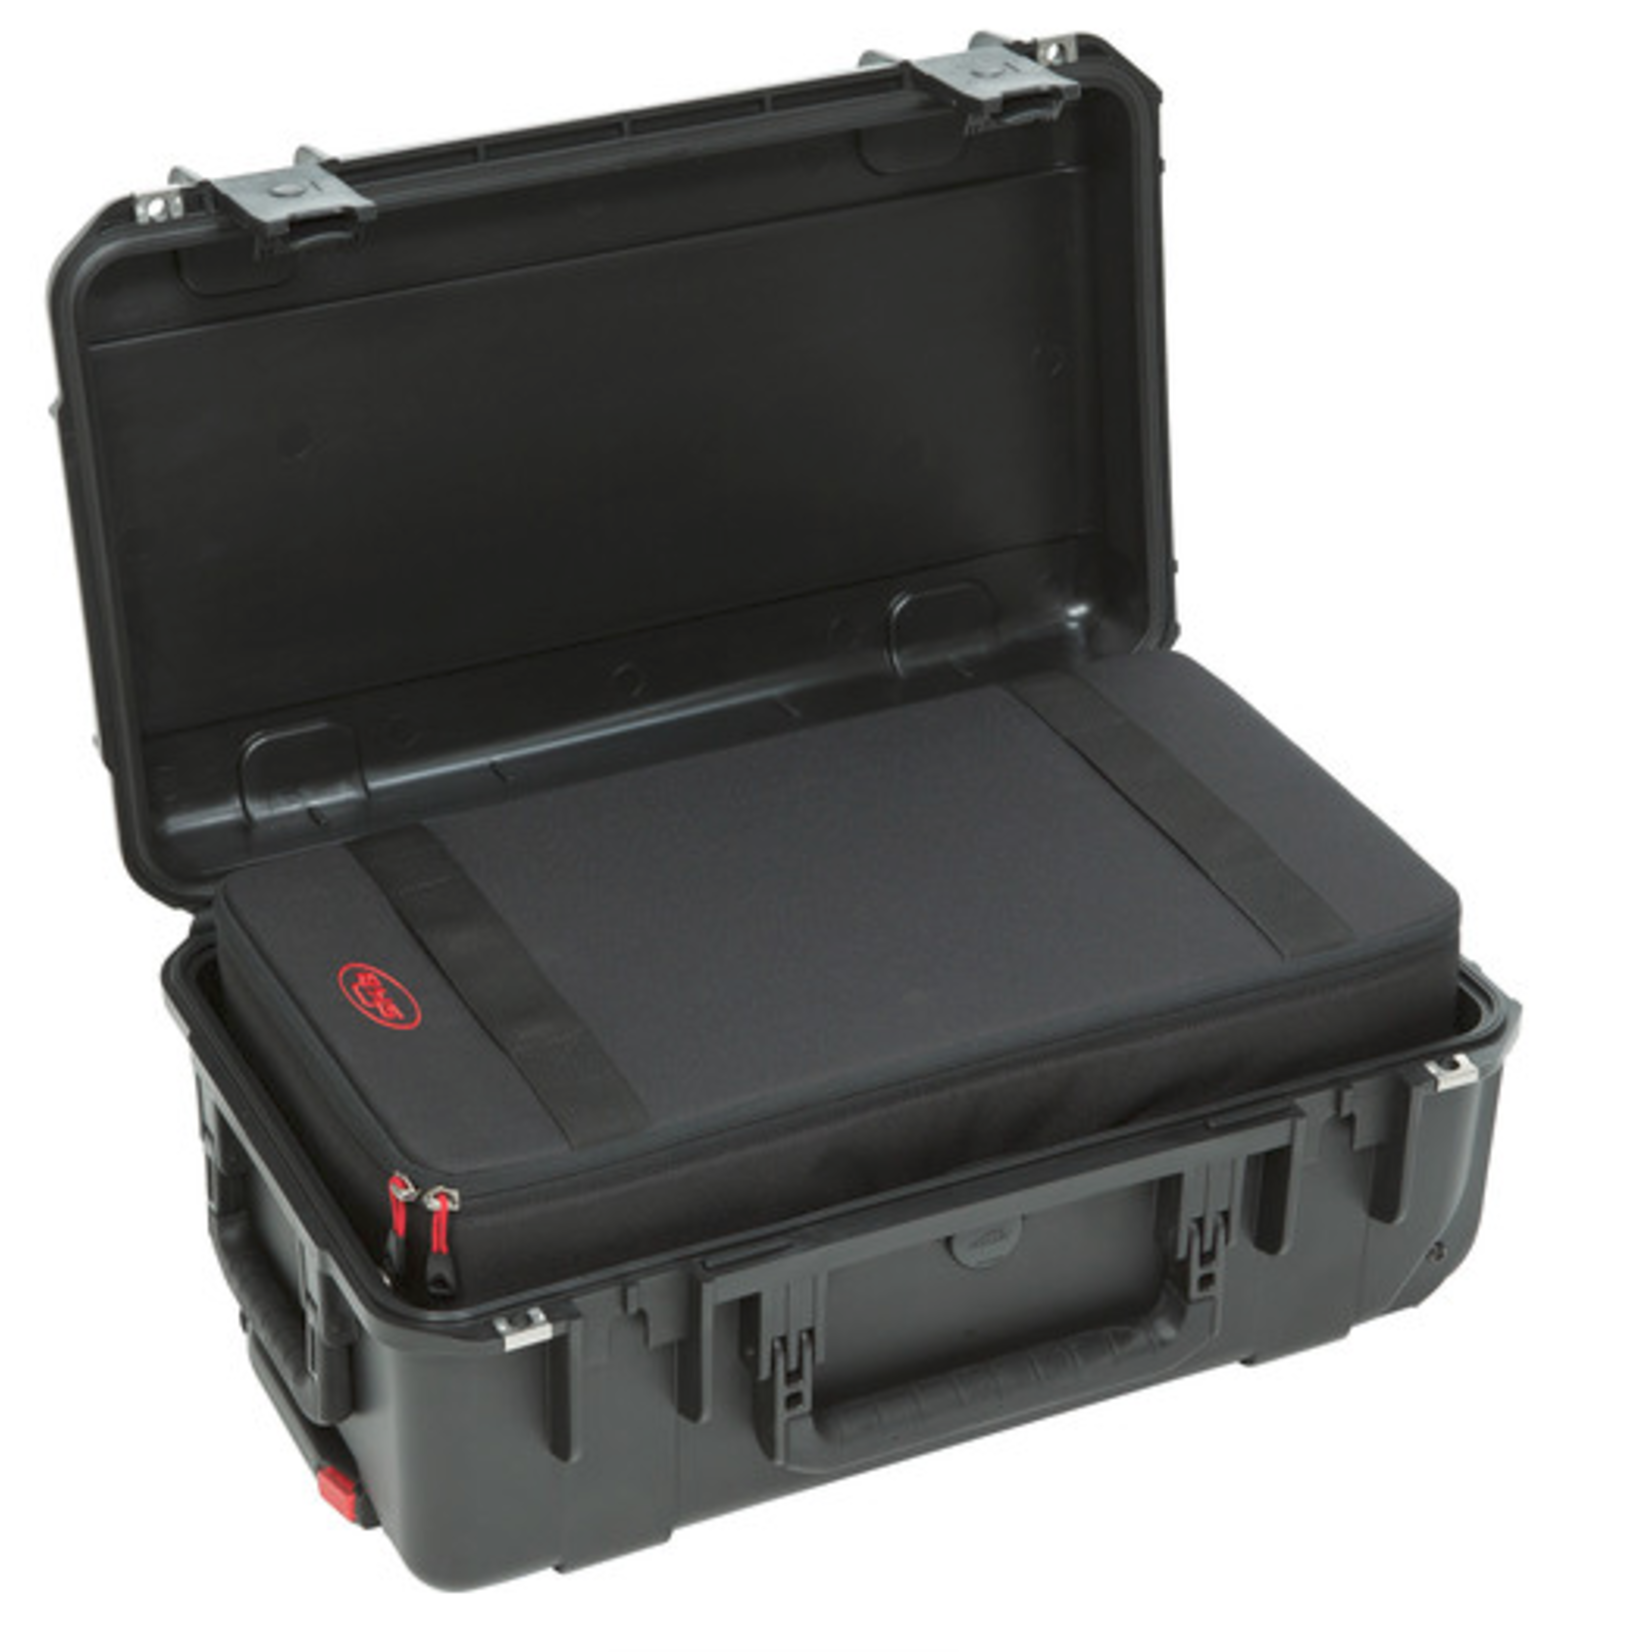 SKB Cases SKB iSeries 2011-7 Case with Think Tank Removable Zippered Divider Interior (Black)